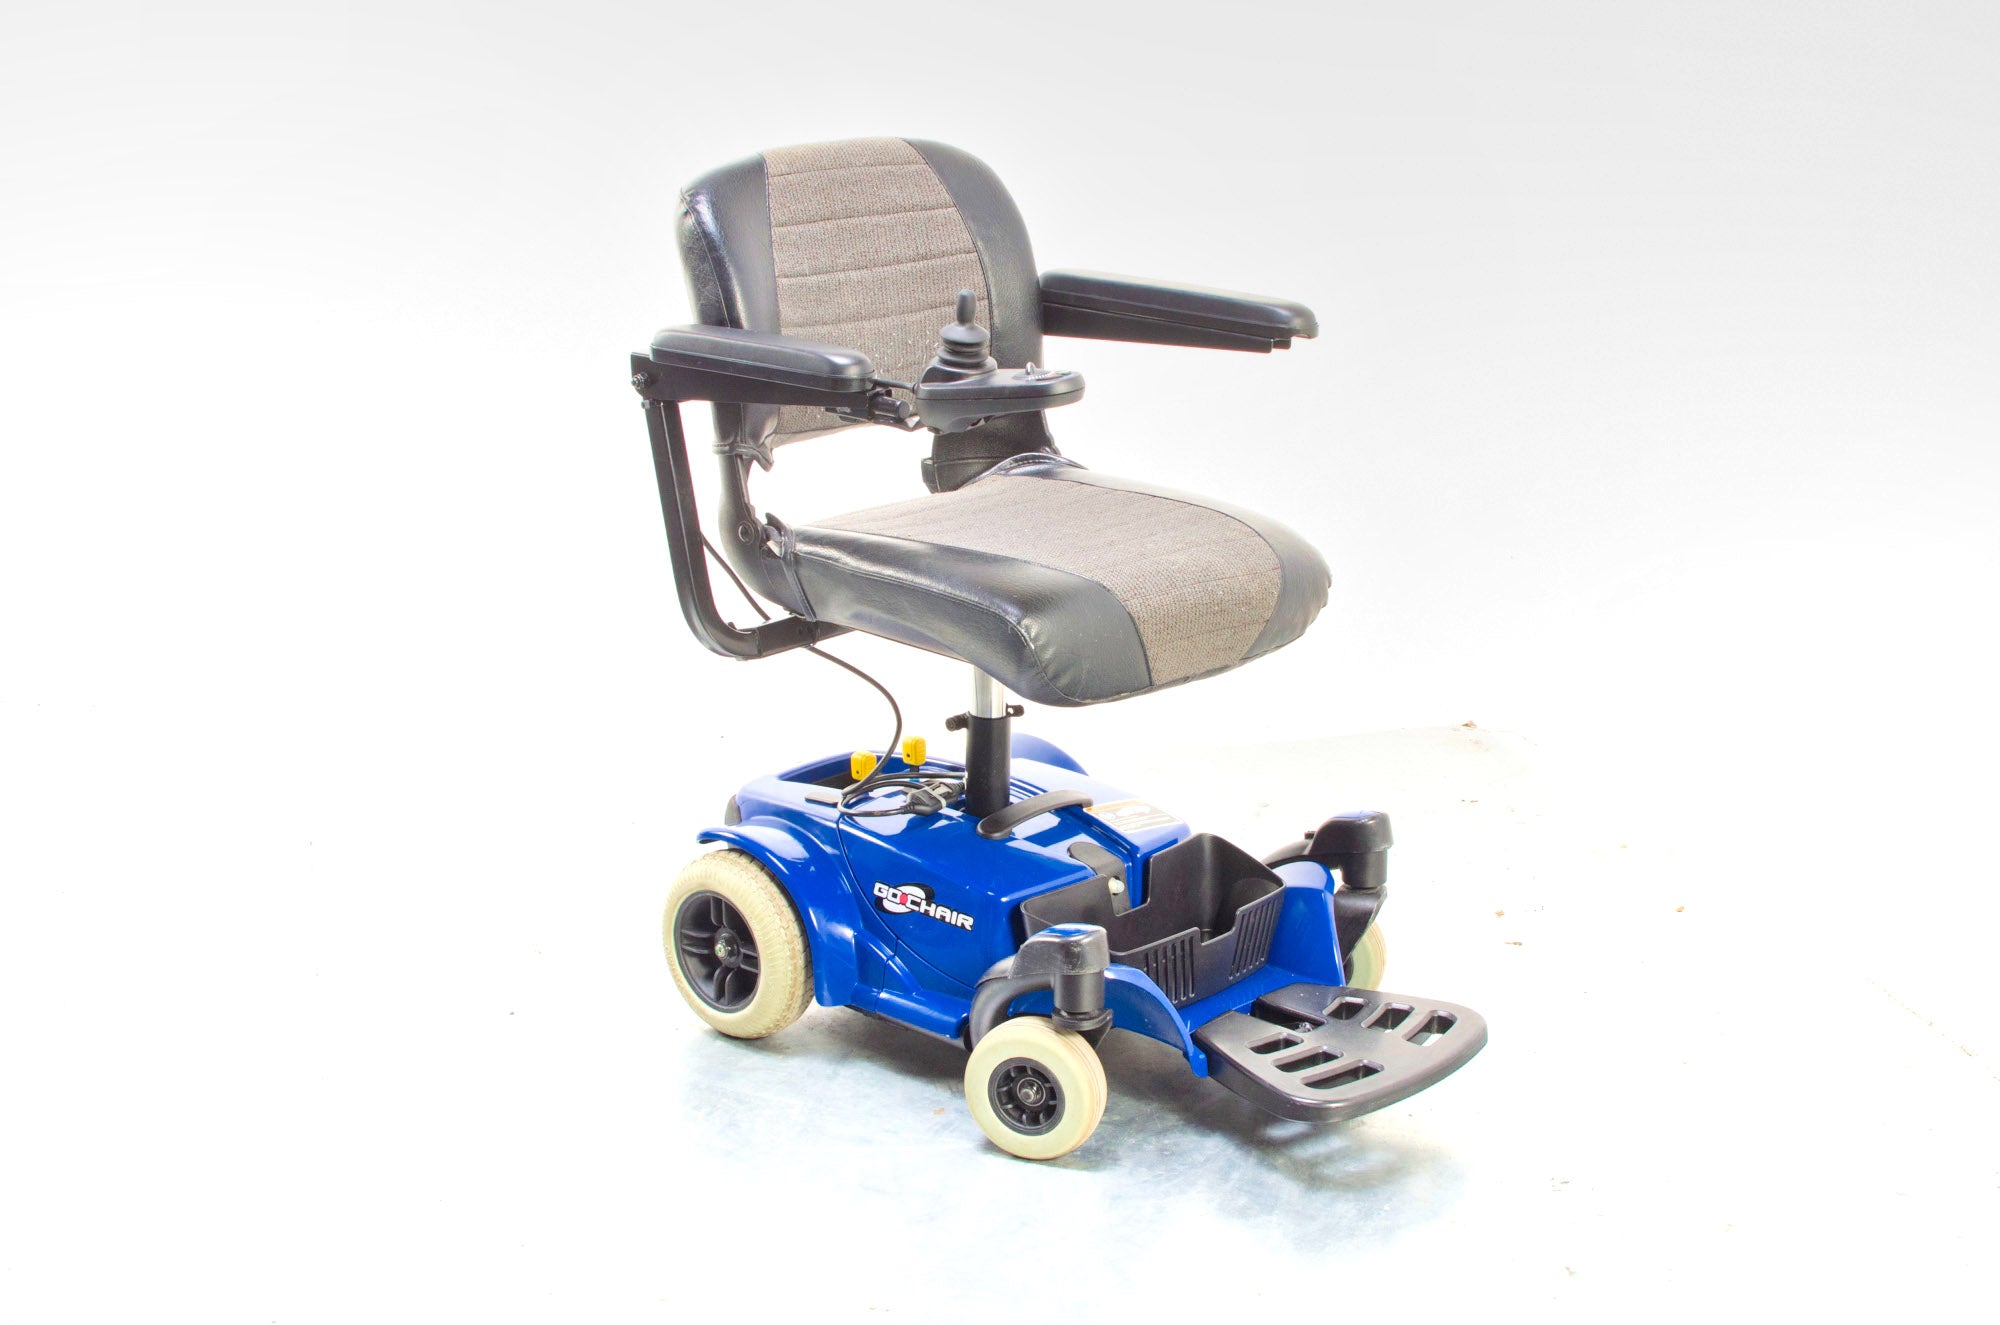 Pride Go Chair Small Compact Indoor Powerchair Electric Wheelchair